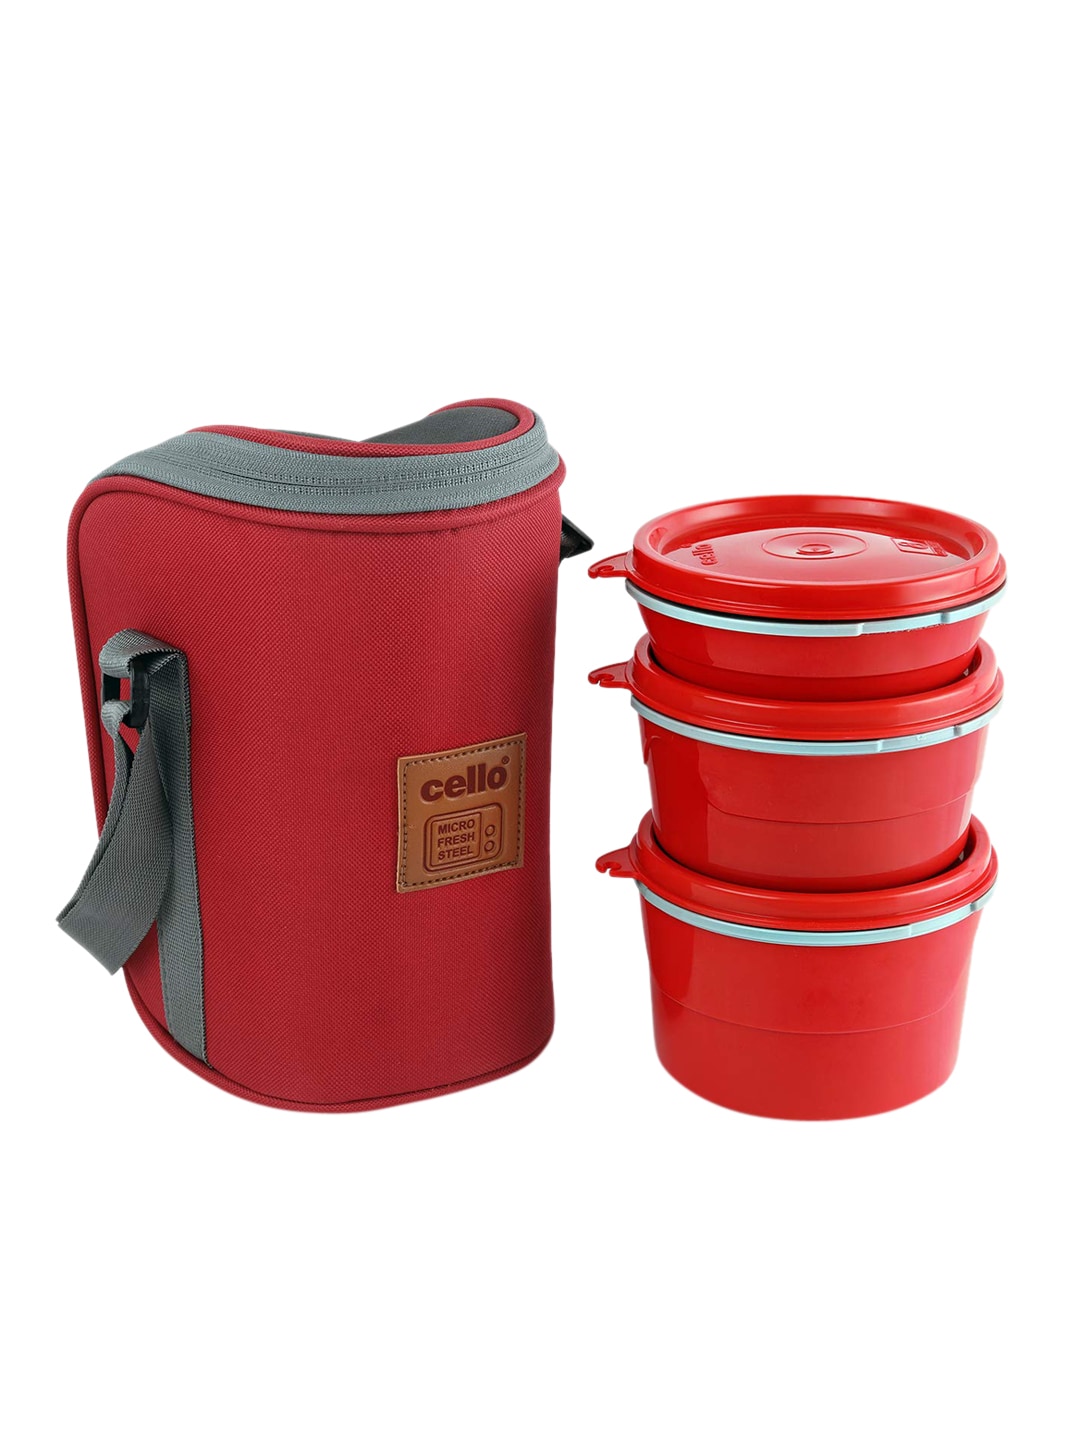 Cello Red Solid Stainless Steel Lunch Box Price in India